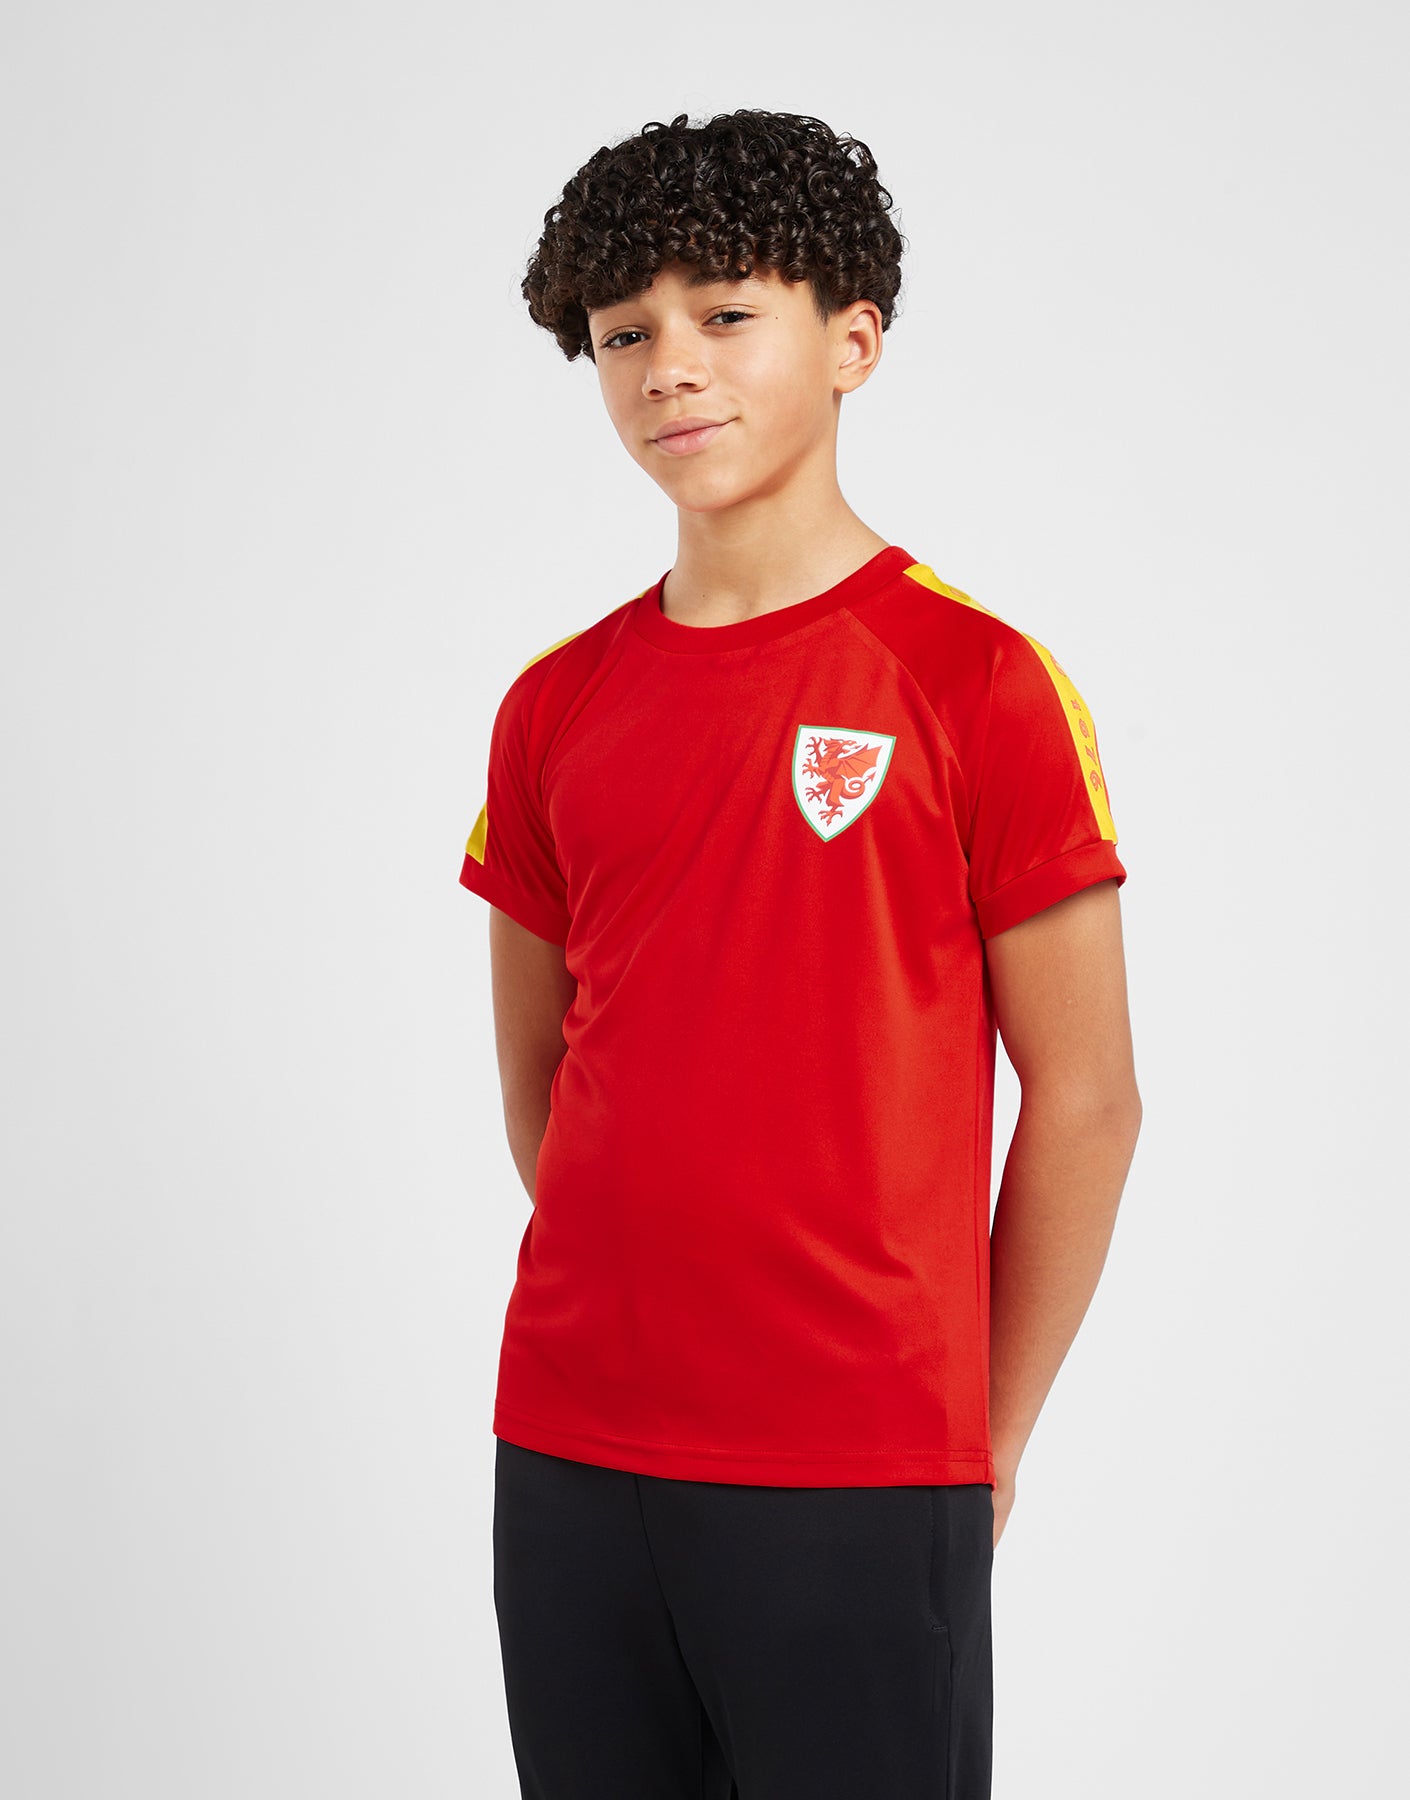 Official Team Wales Kids Sleeve Print T-Shirt - Red - The World Football Store